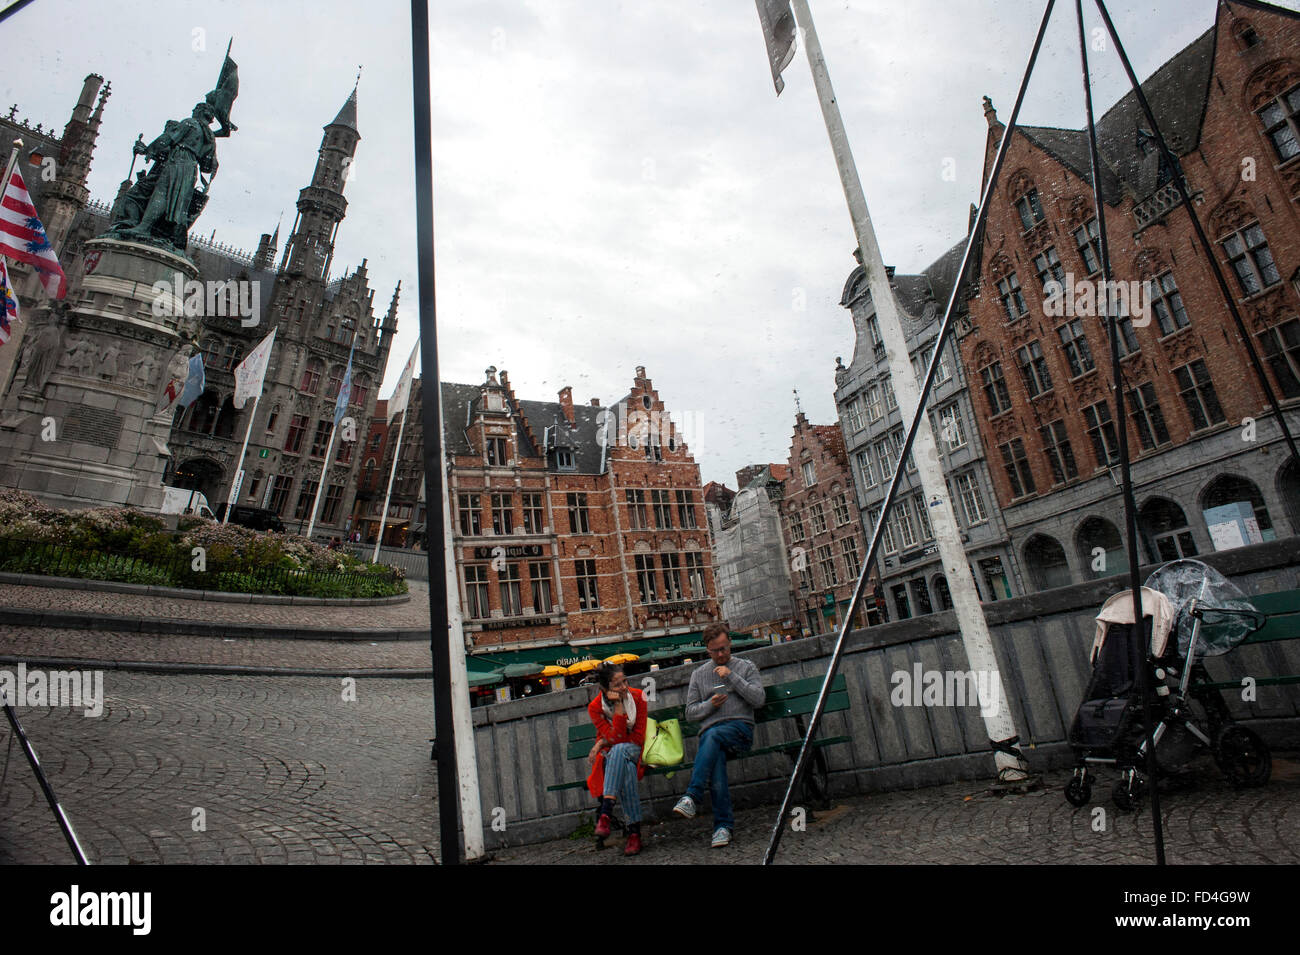 Several buildings in the market square (Markt) Bruges are reflected in glass. Stock Photo